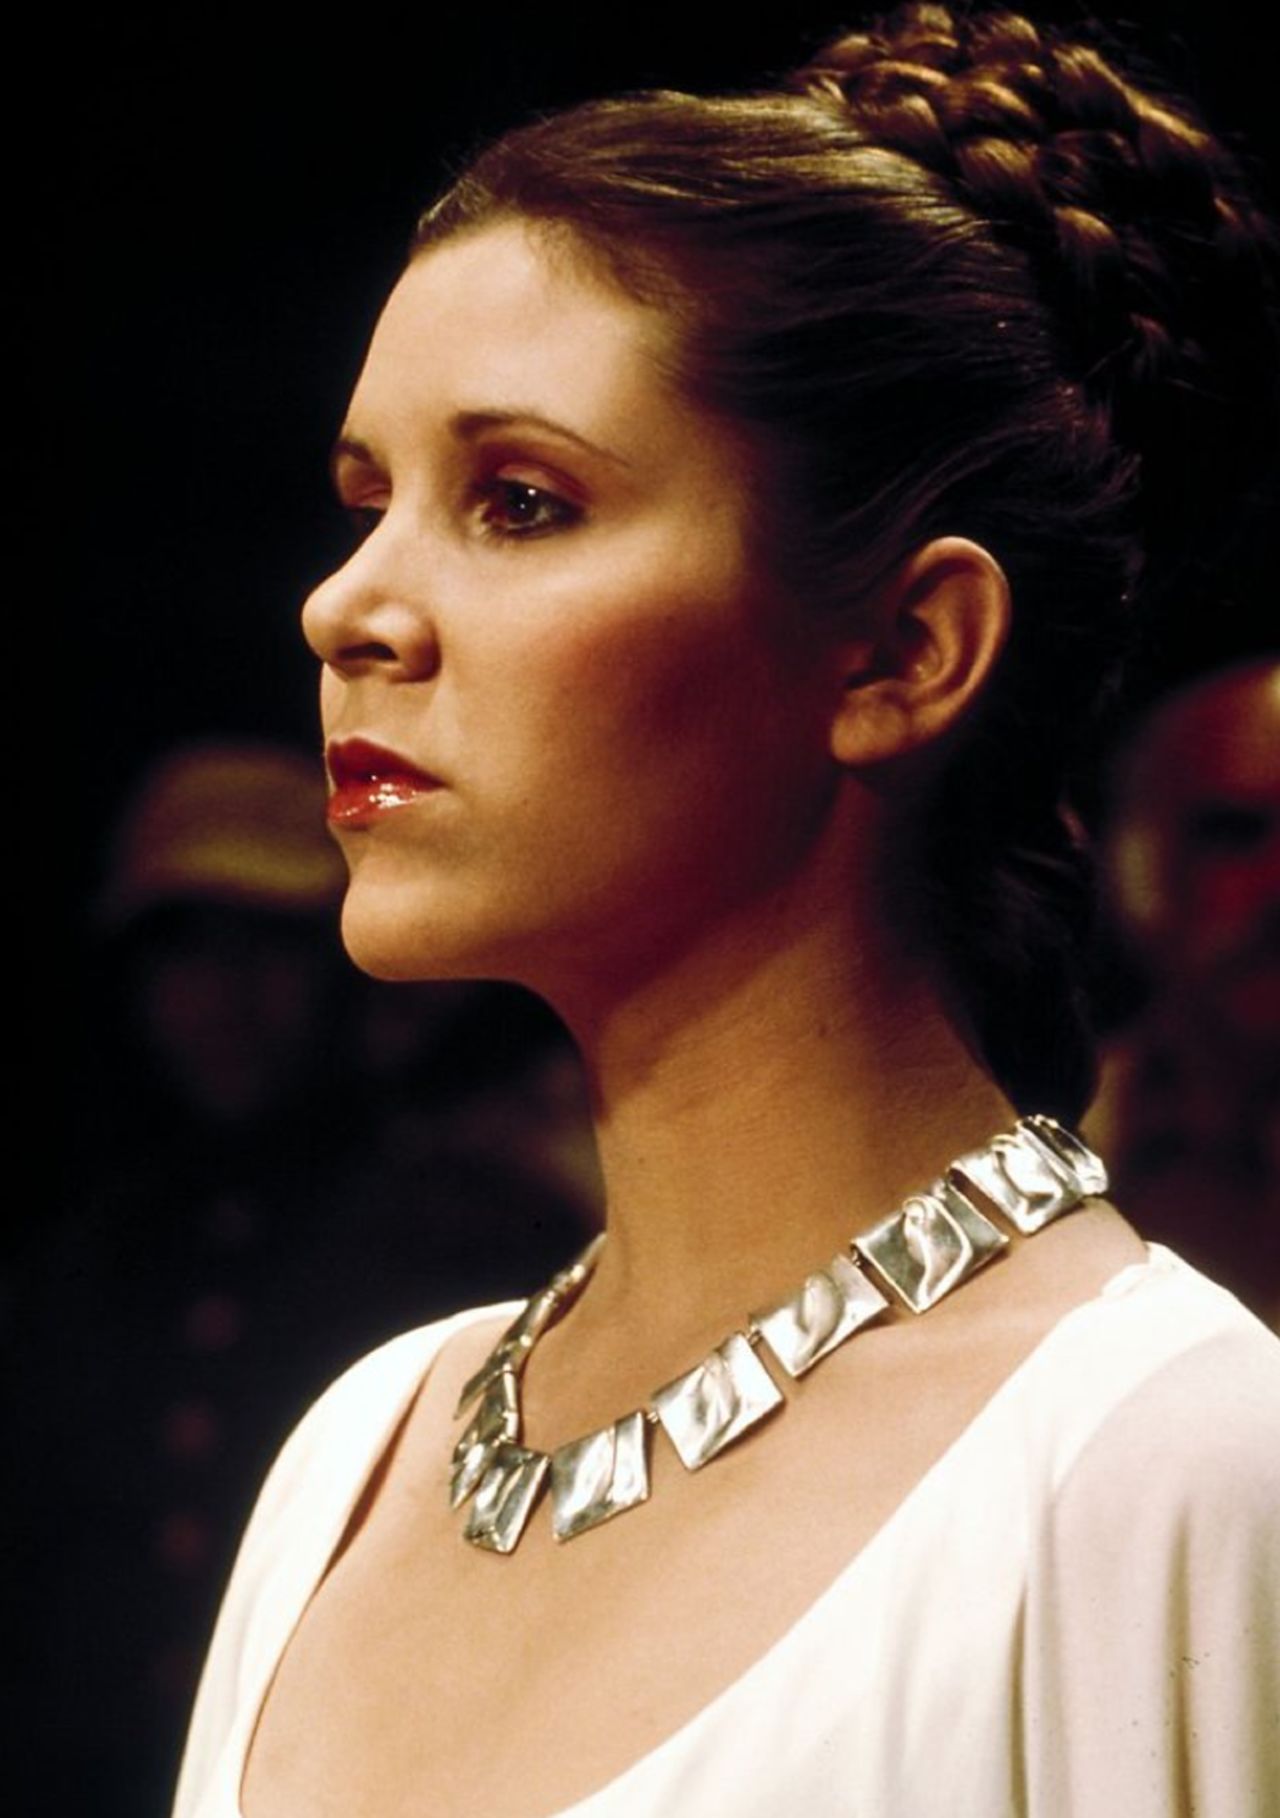 Luke's twin sister Leia is the Princess of Alderaan. Leia is romantically pursued by Han Solo.